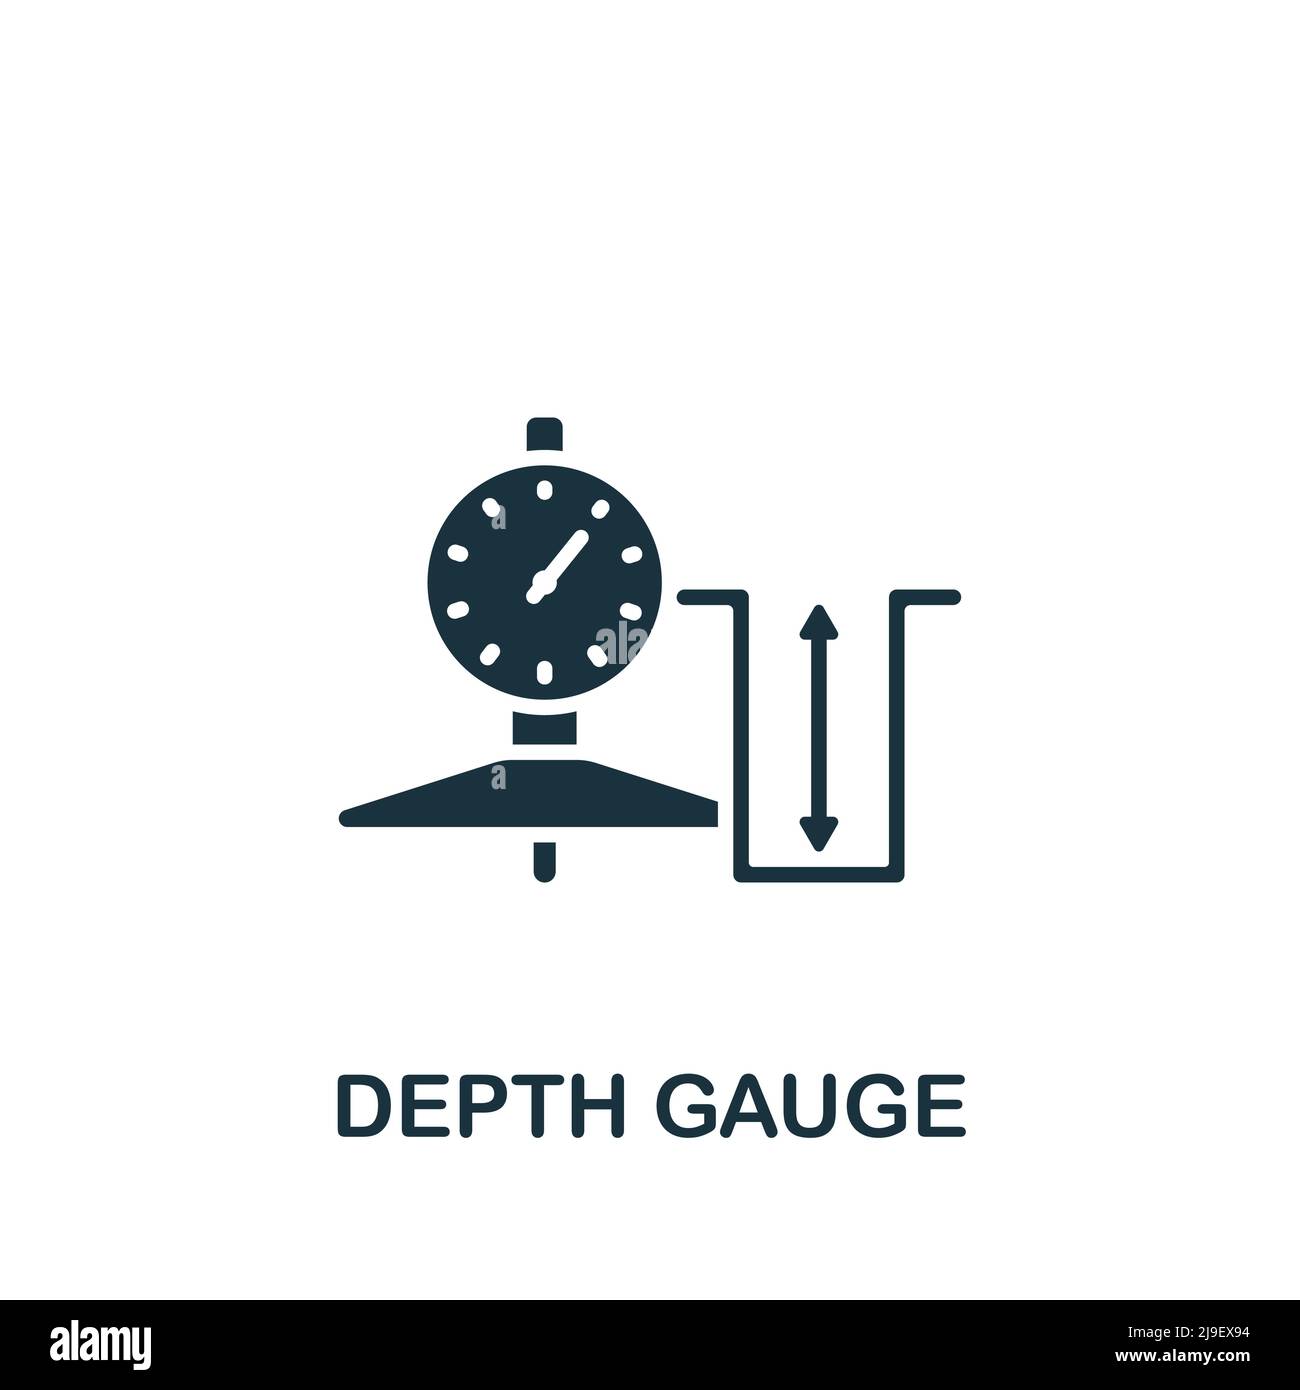 Depth Gauge icon. Monochrome simple Measuring icon for templates, web design and infographics Stock Vector